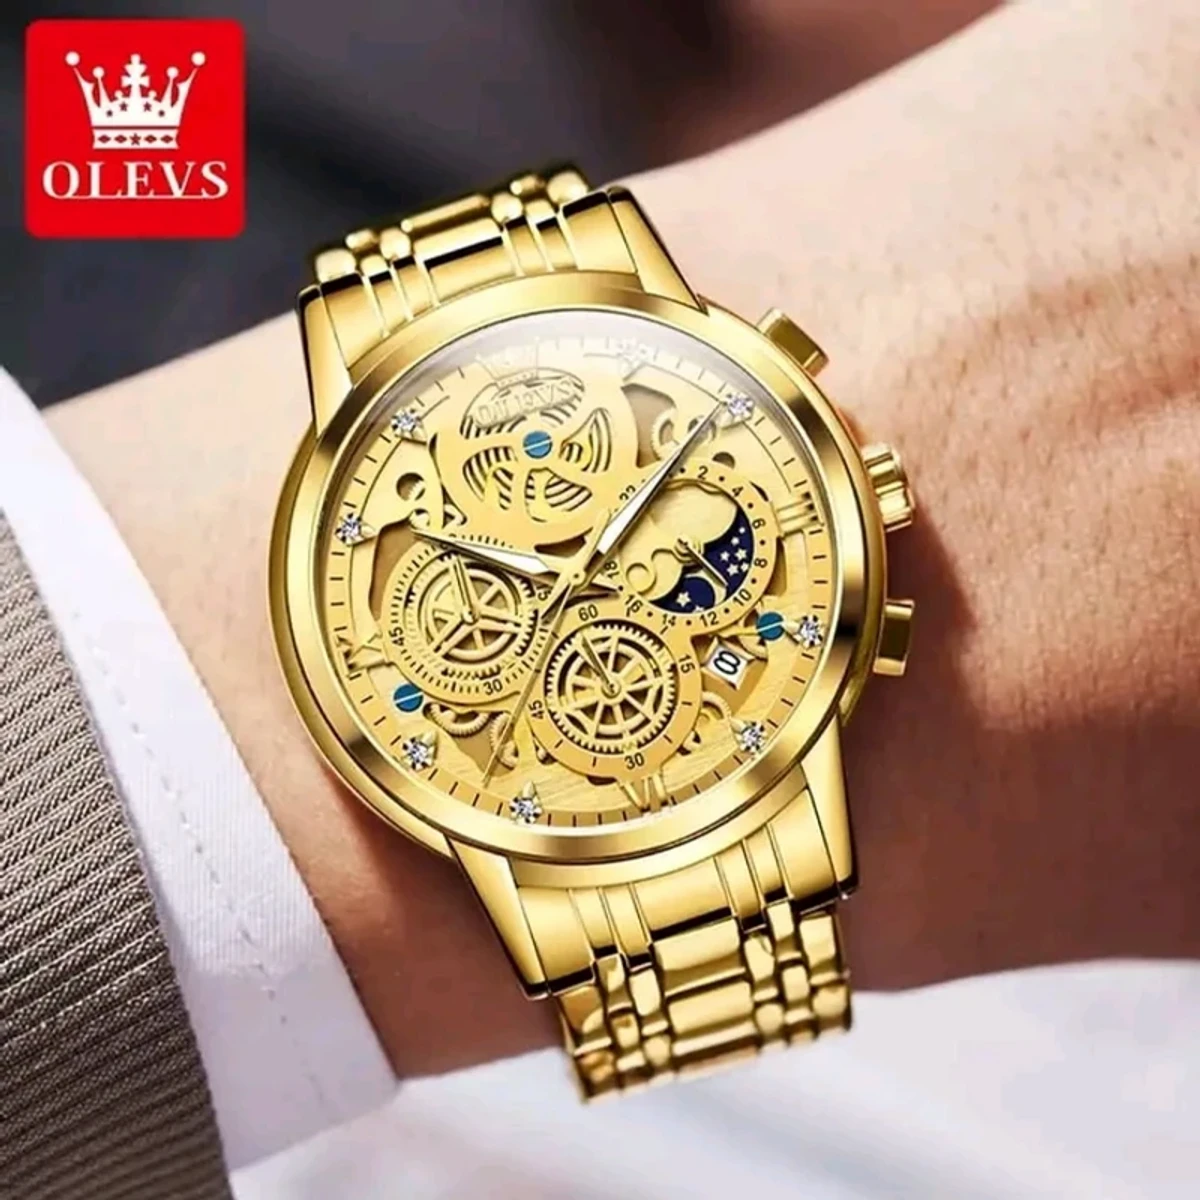 OLEVS WATCH MODEL 9947 FOR MEN WATERPROOF TRENDY HOLLOW-CARVED DESIGN STAINLESS STEEL CHRONOGRAPH LUMINOUS MULTIFUNCTIONAL WATCH